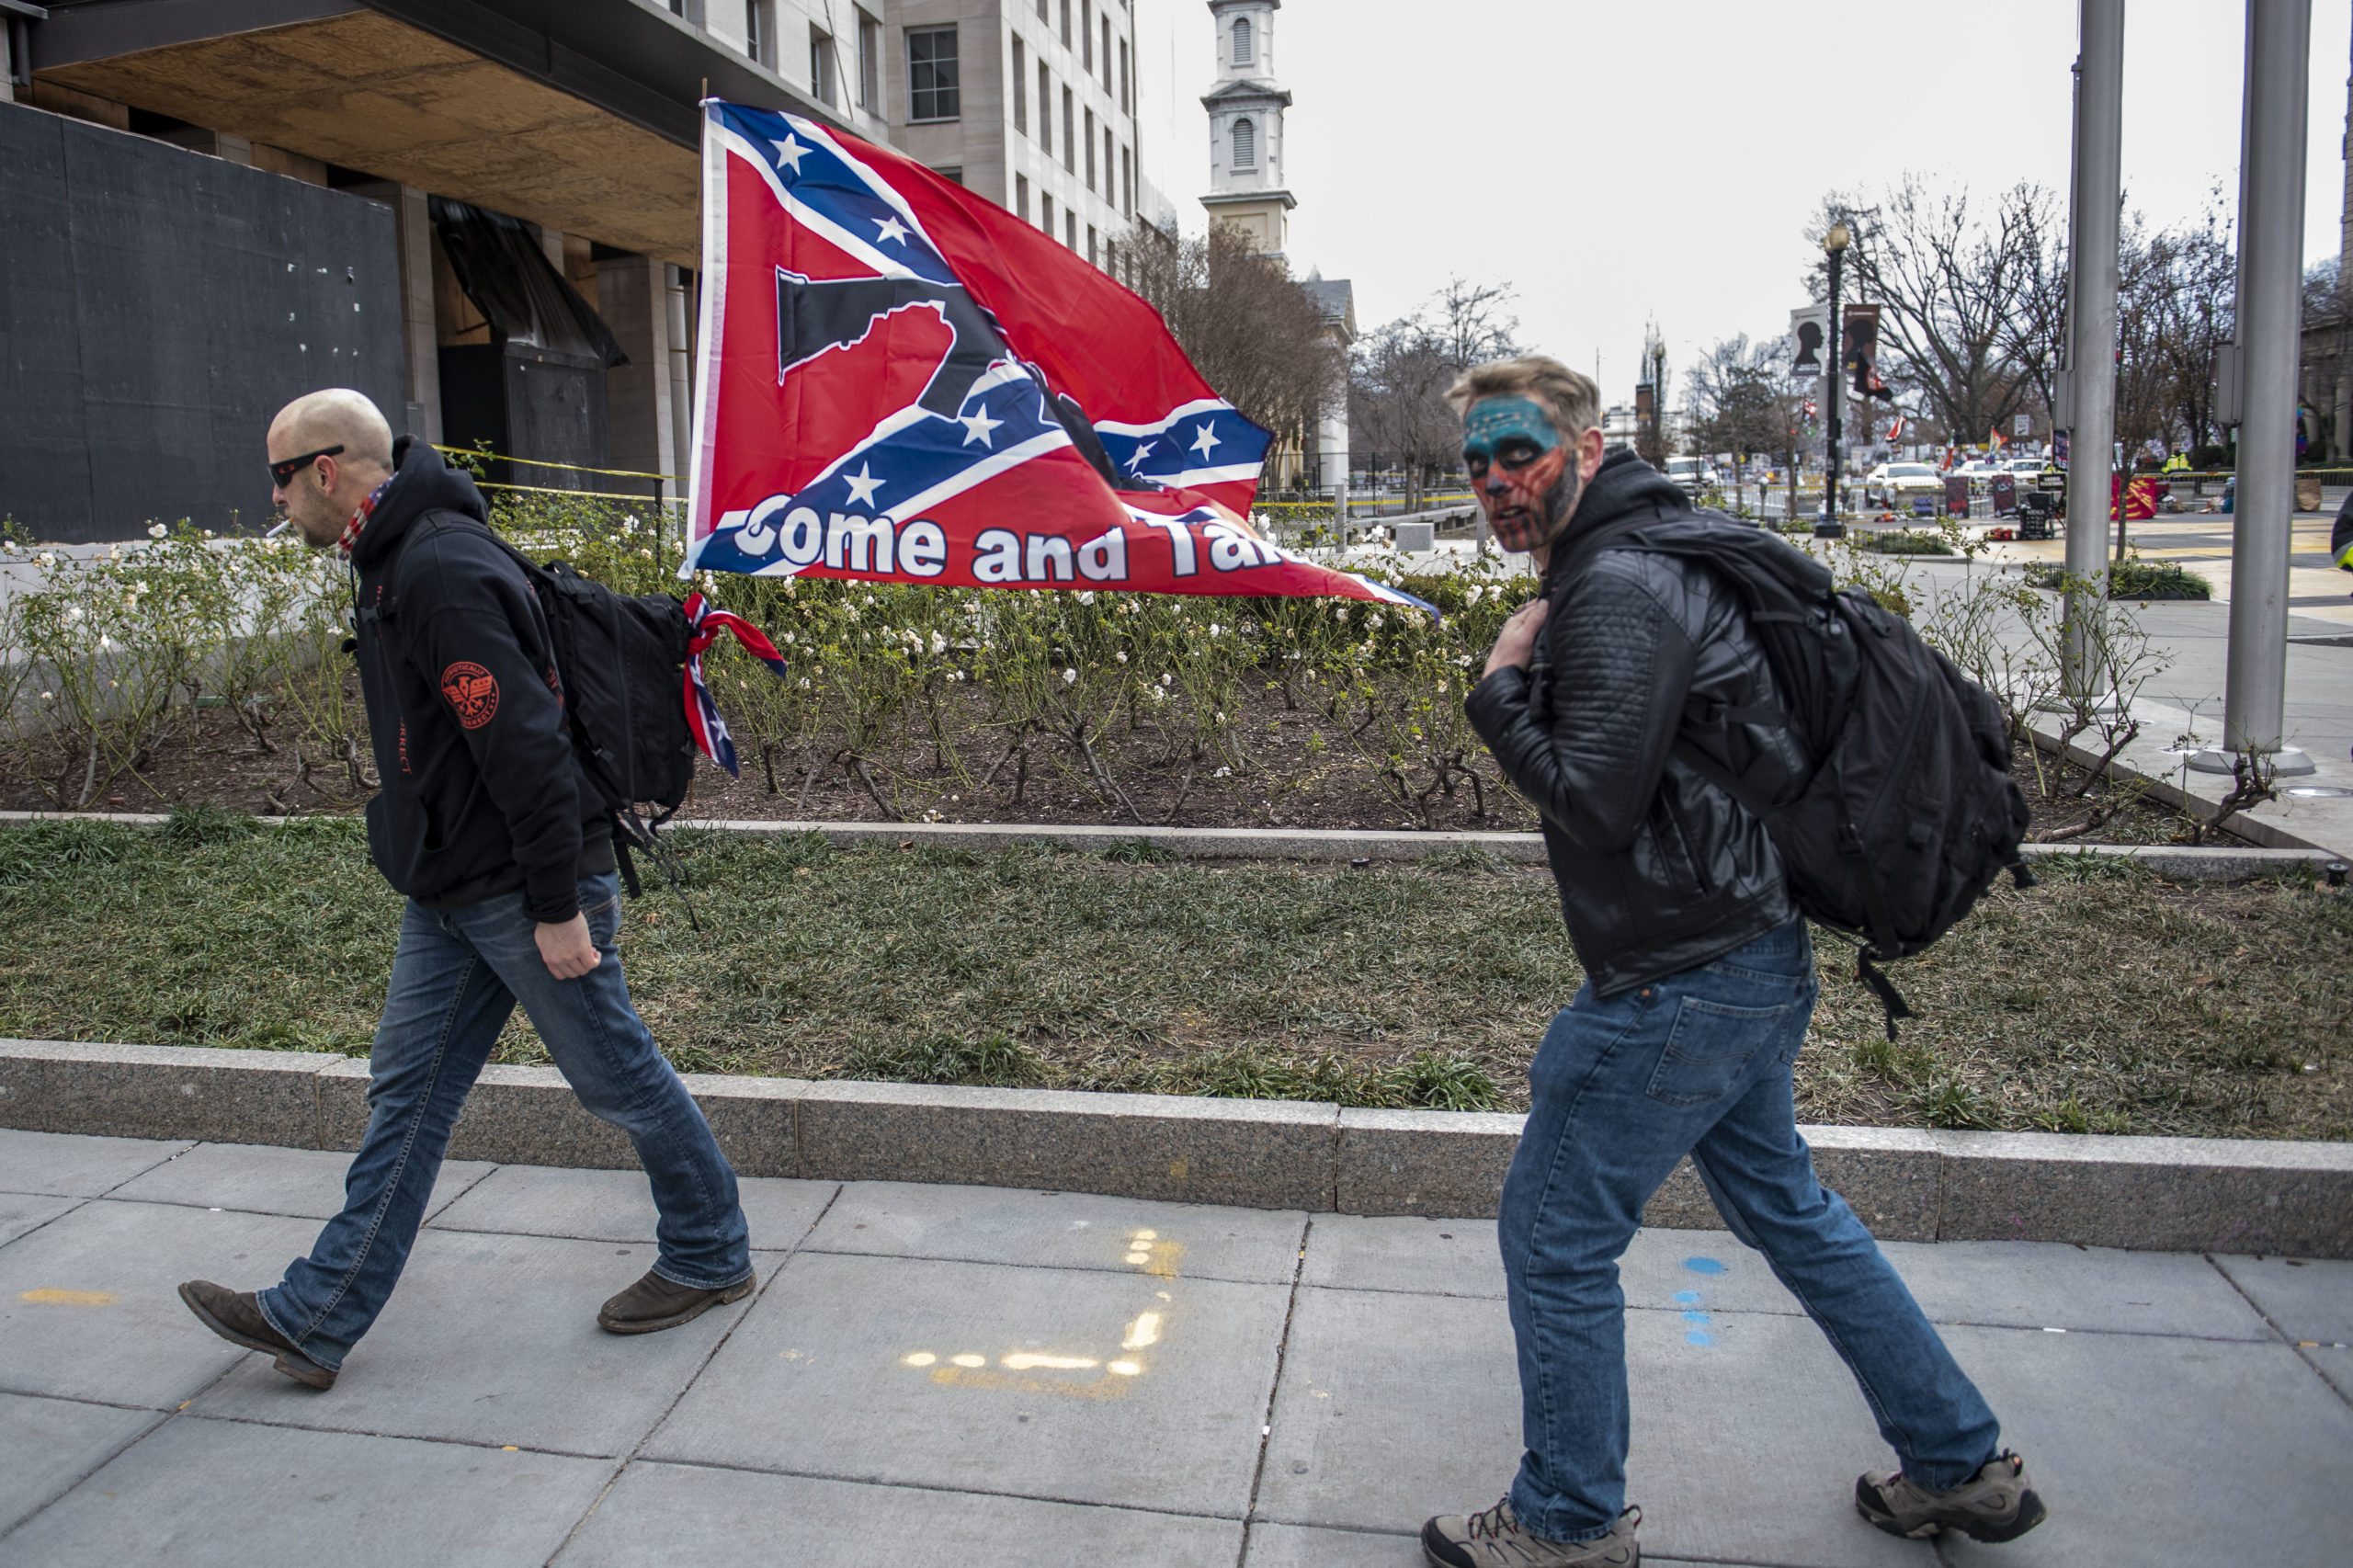 A supporter of US President Donald Trump display a Confederate flag next to Black Lives Matter Plaza as supporters from around the country rally in the US Capital to protest the upcoming electoral college certification of Joe Biden as President in Washington, DC on January 6, 2021. (Photo by Eric BARADAT / AFP) (Photo by ERIC BARADAT/AFP via Getty Images)